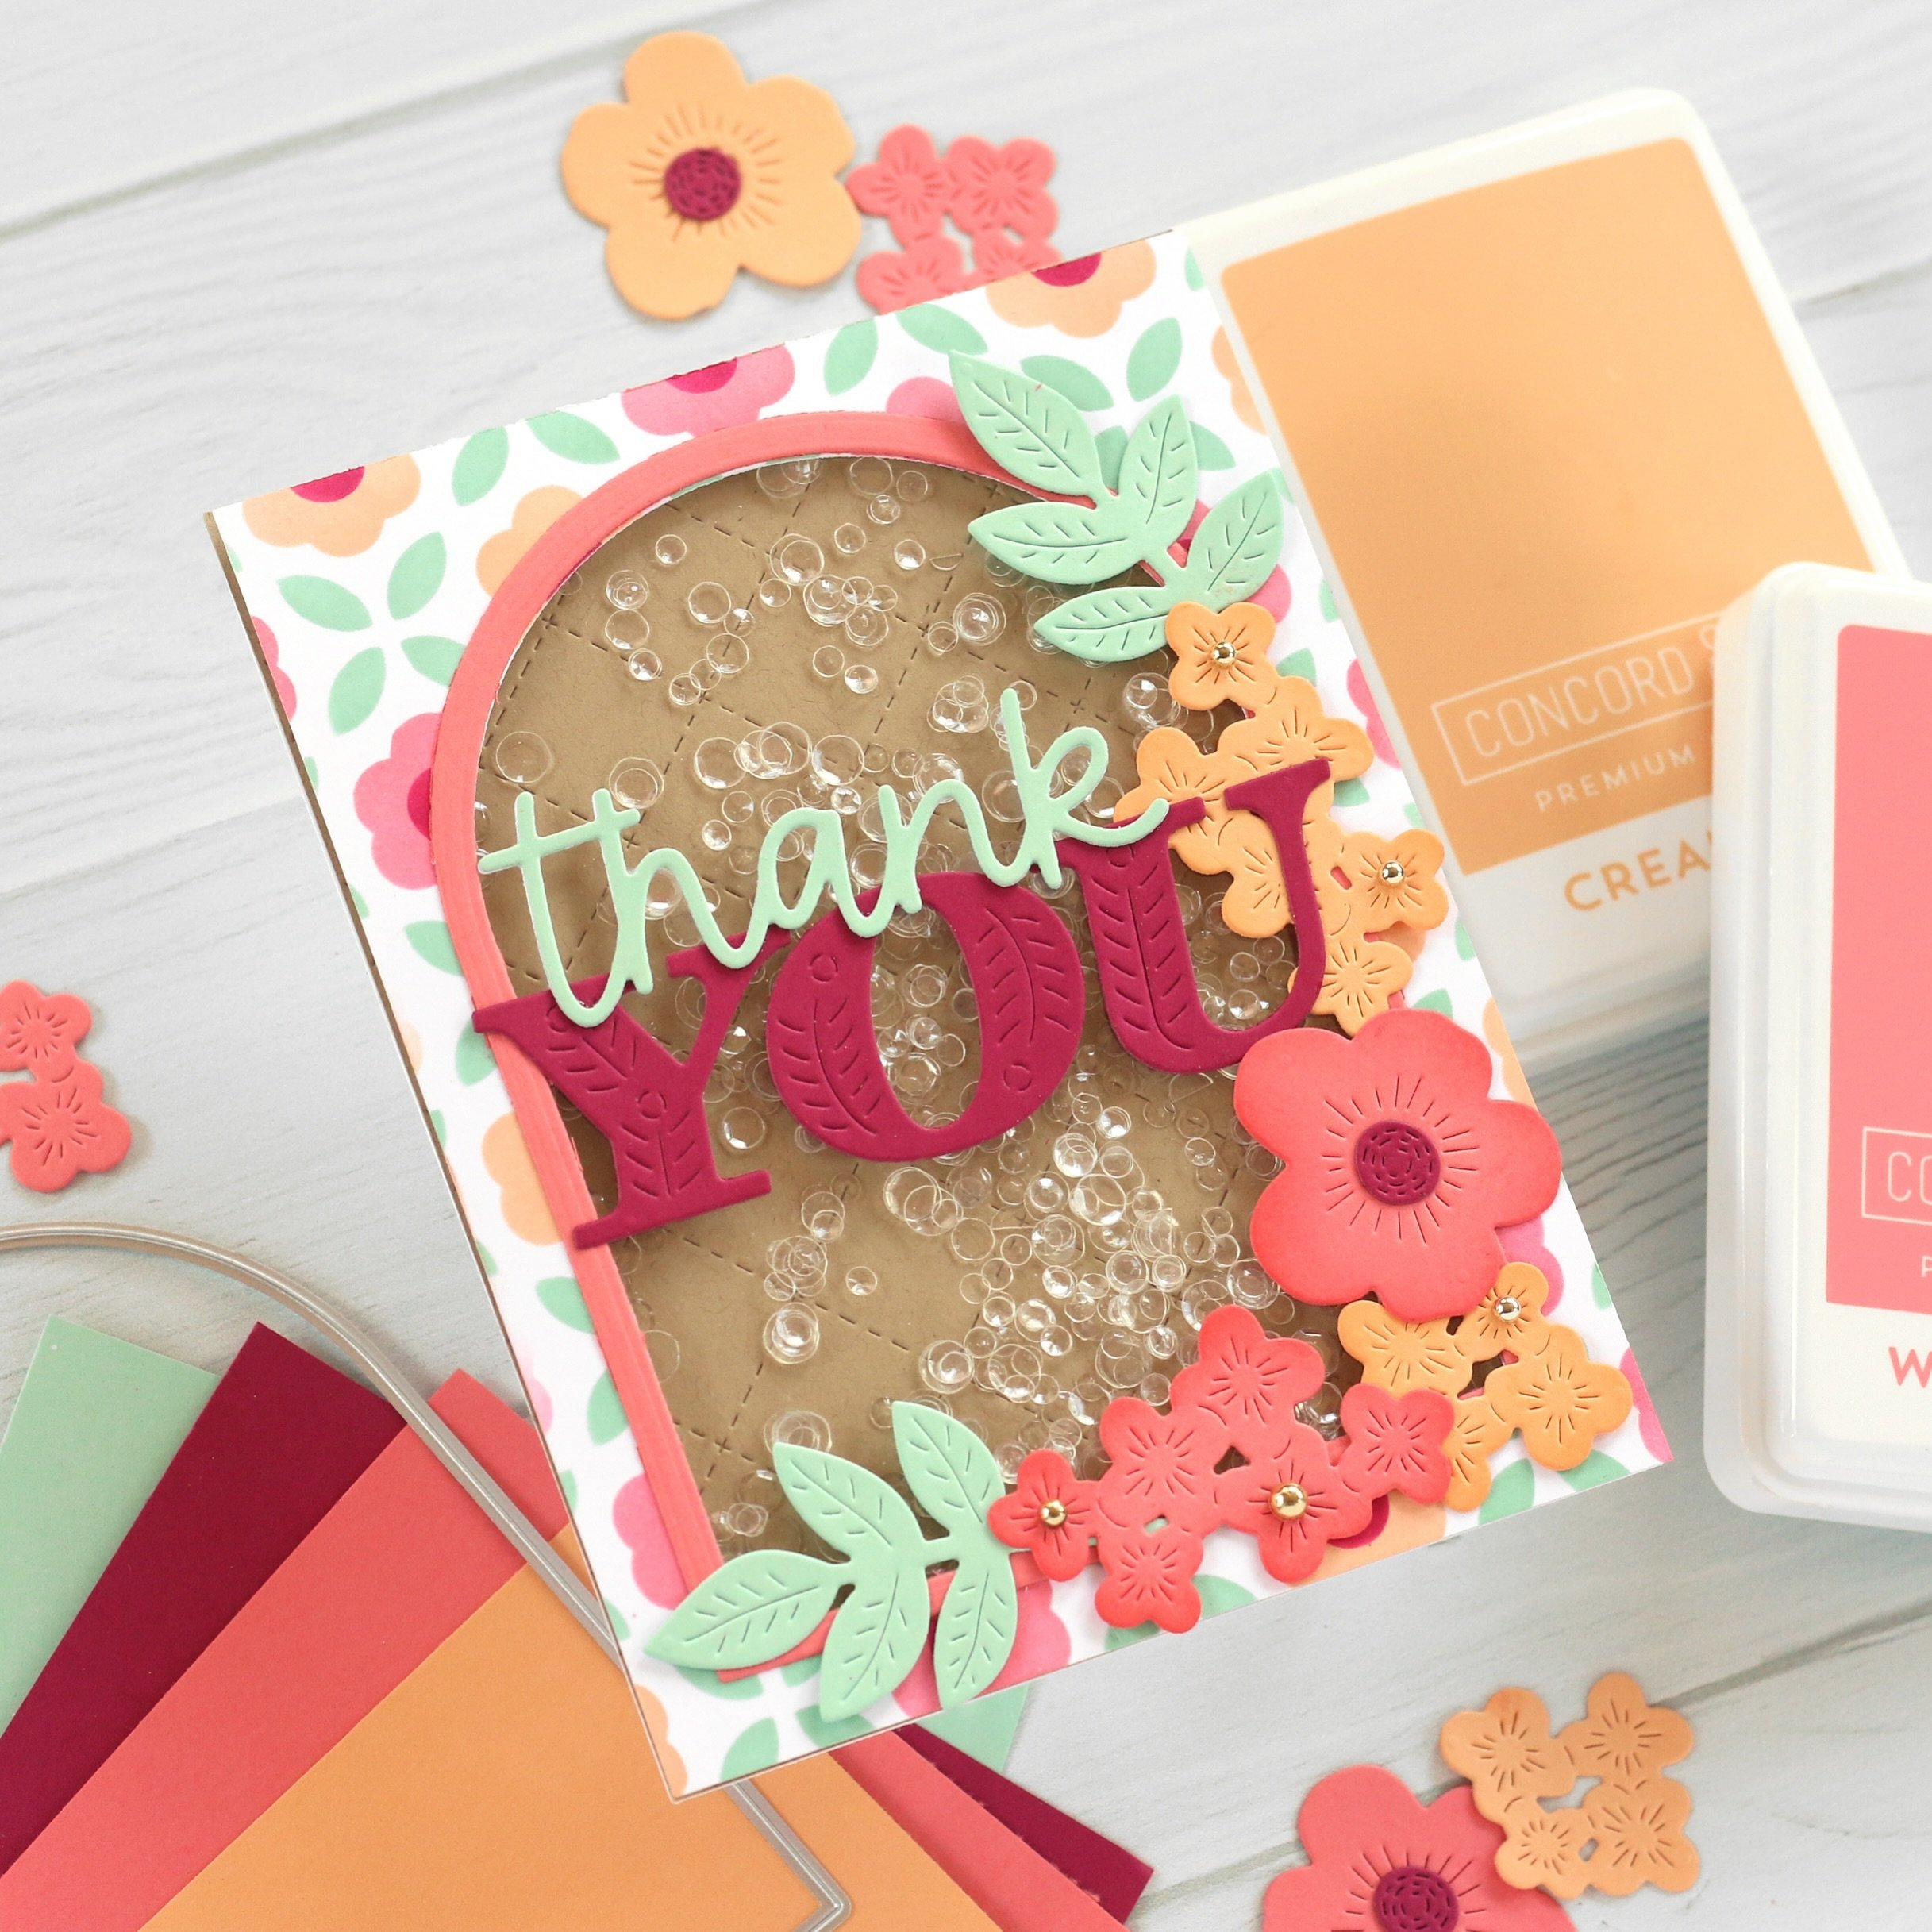 Today&rsquo;s live on YouTube was a twofer! Watch on replay now!
.
Check out the shaped card I created in today&rsquo;s live AND this shaker card with the leftovers, plus some extra die cuts! I love creating an extra card when I can, especially when 